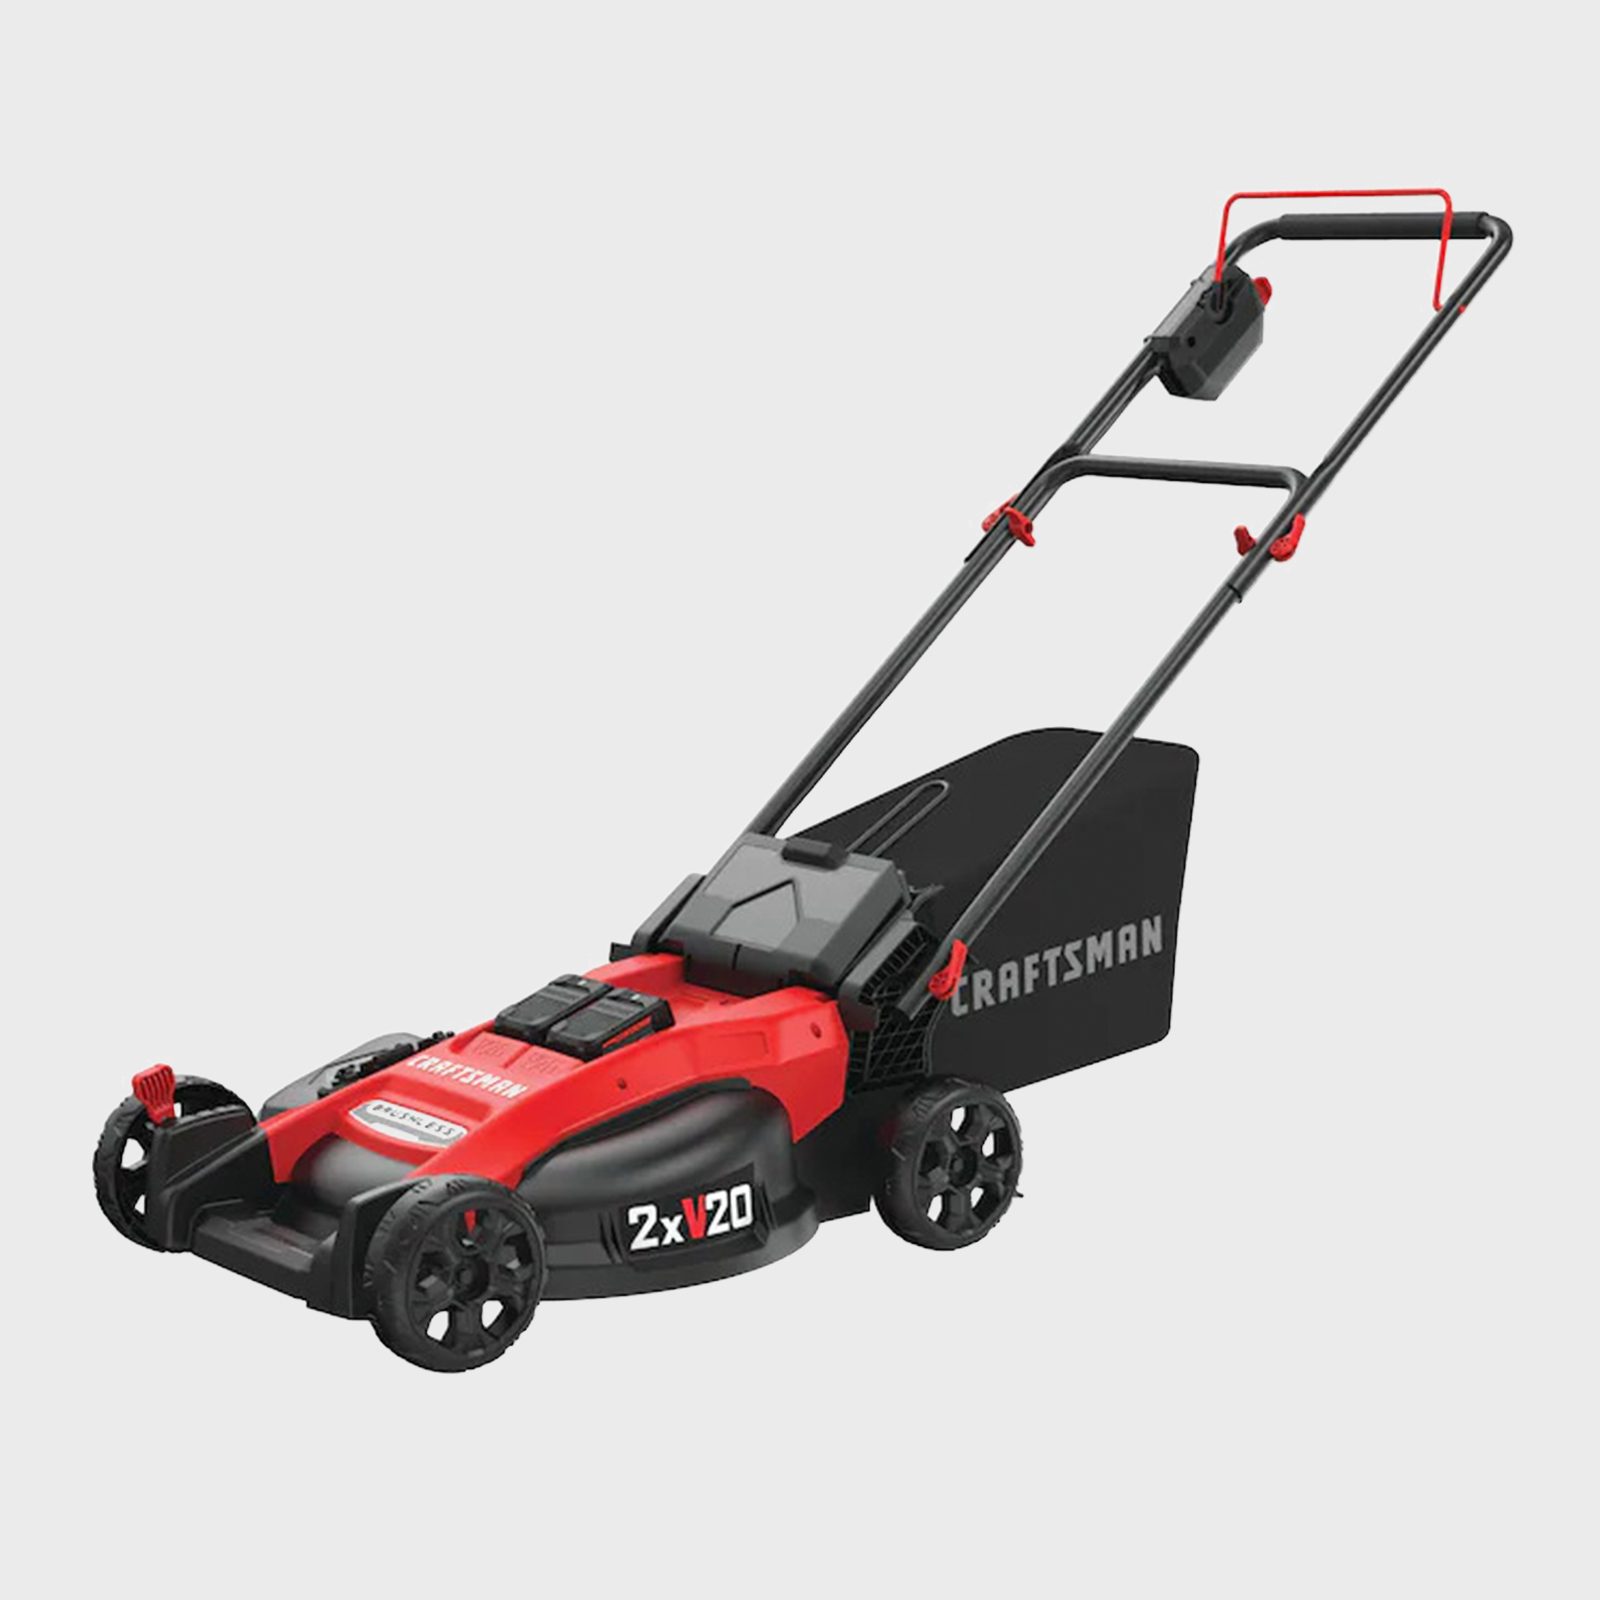 20 Volt Max Brushless Lithium Ion Push Electric Lawn Mower Ecomm Via Lowes